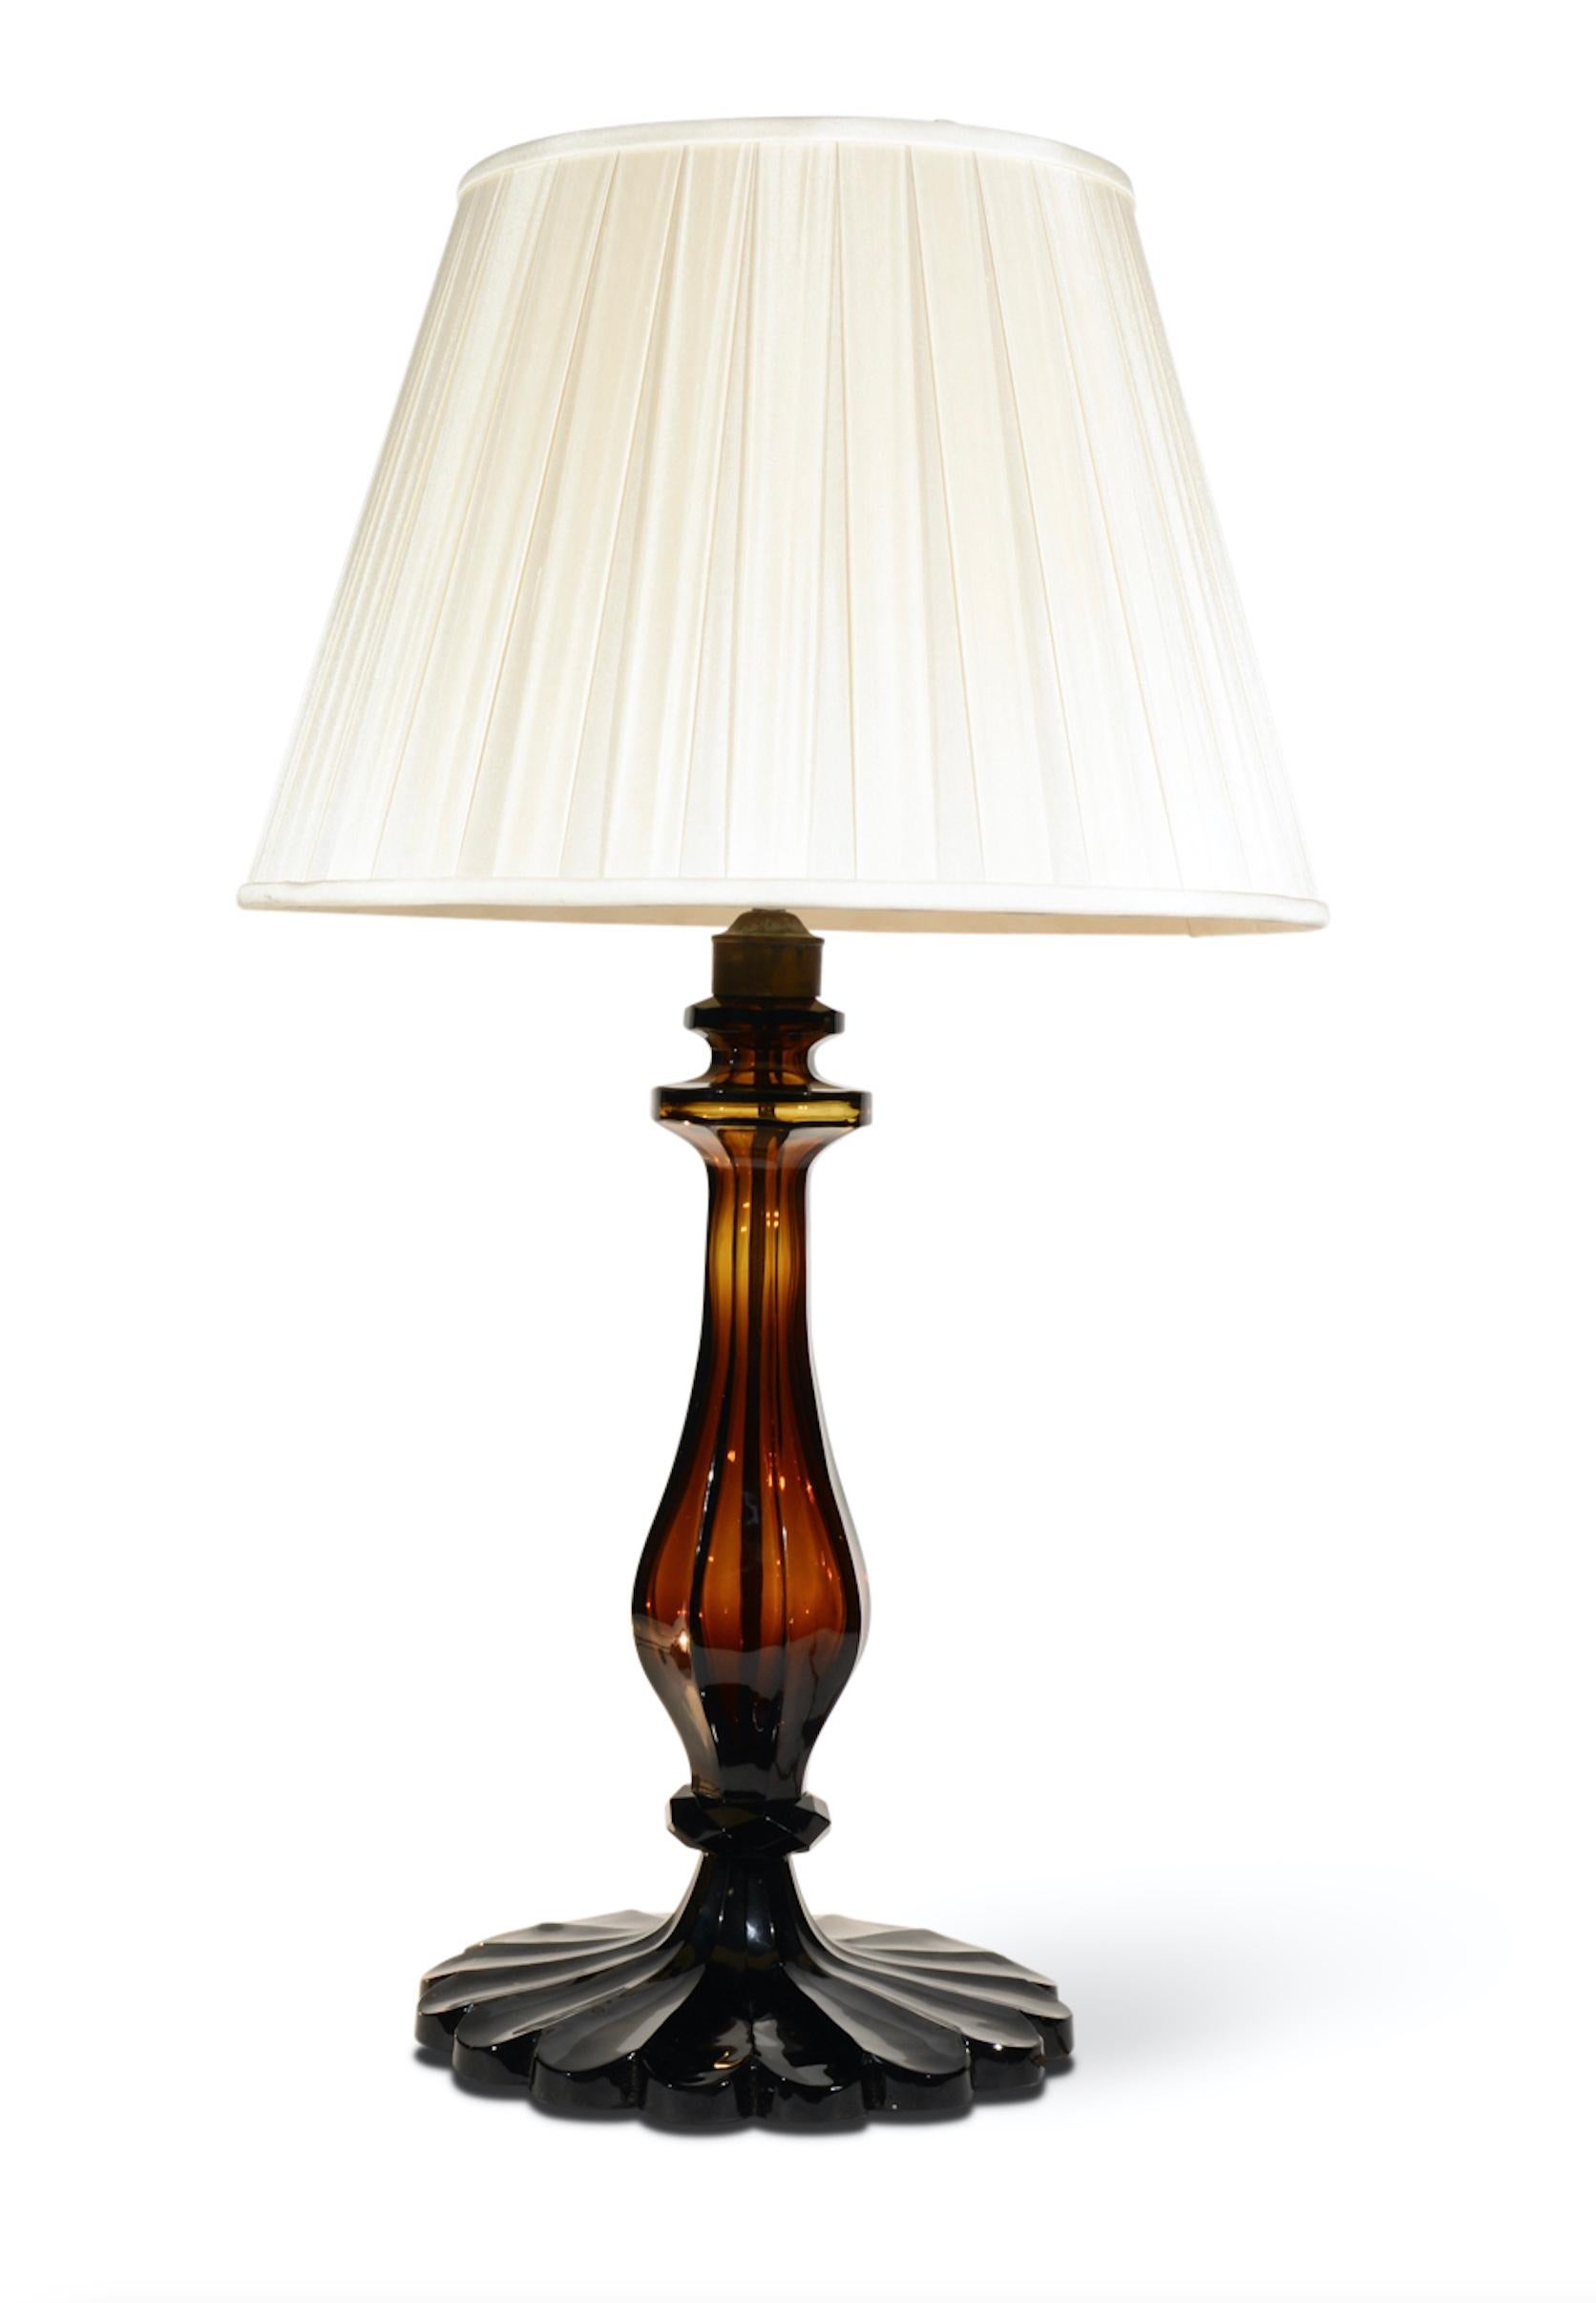 A superb pair of amber cut-glass table lamps, each with moulded faceted baluster stems, and scalloped base.

Measures: Height 19 in (48.5 cm) excluding electrical fitments and lampshades.

All of our lamps can be wired for use worldwide. A